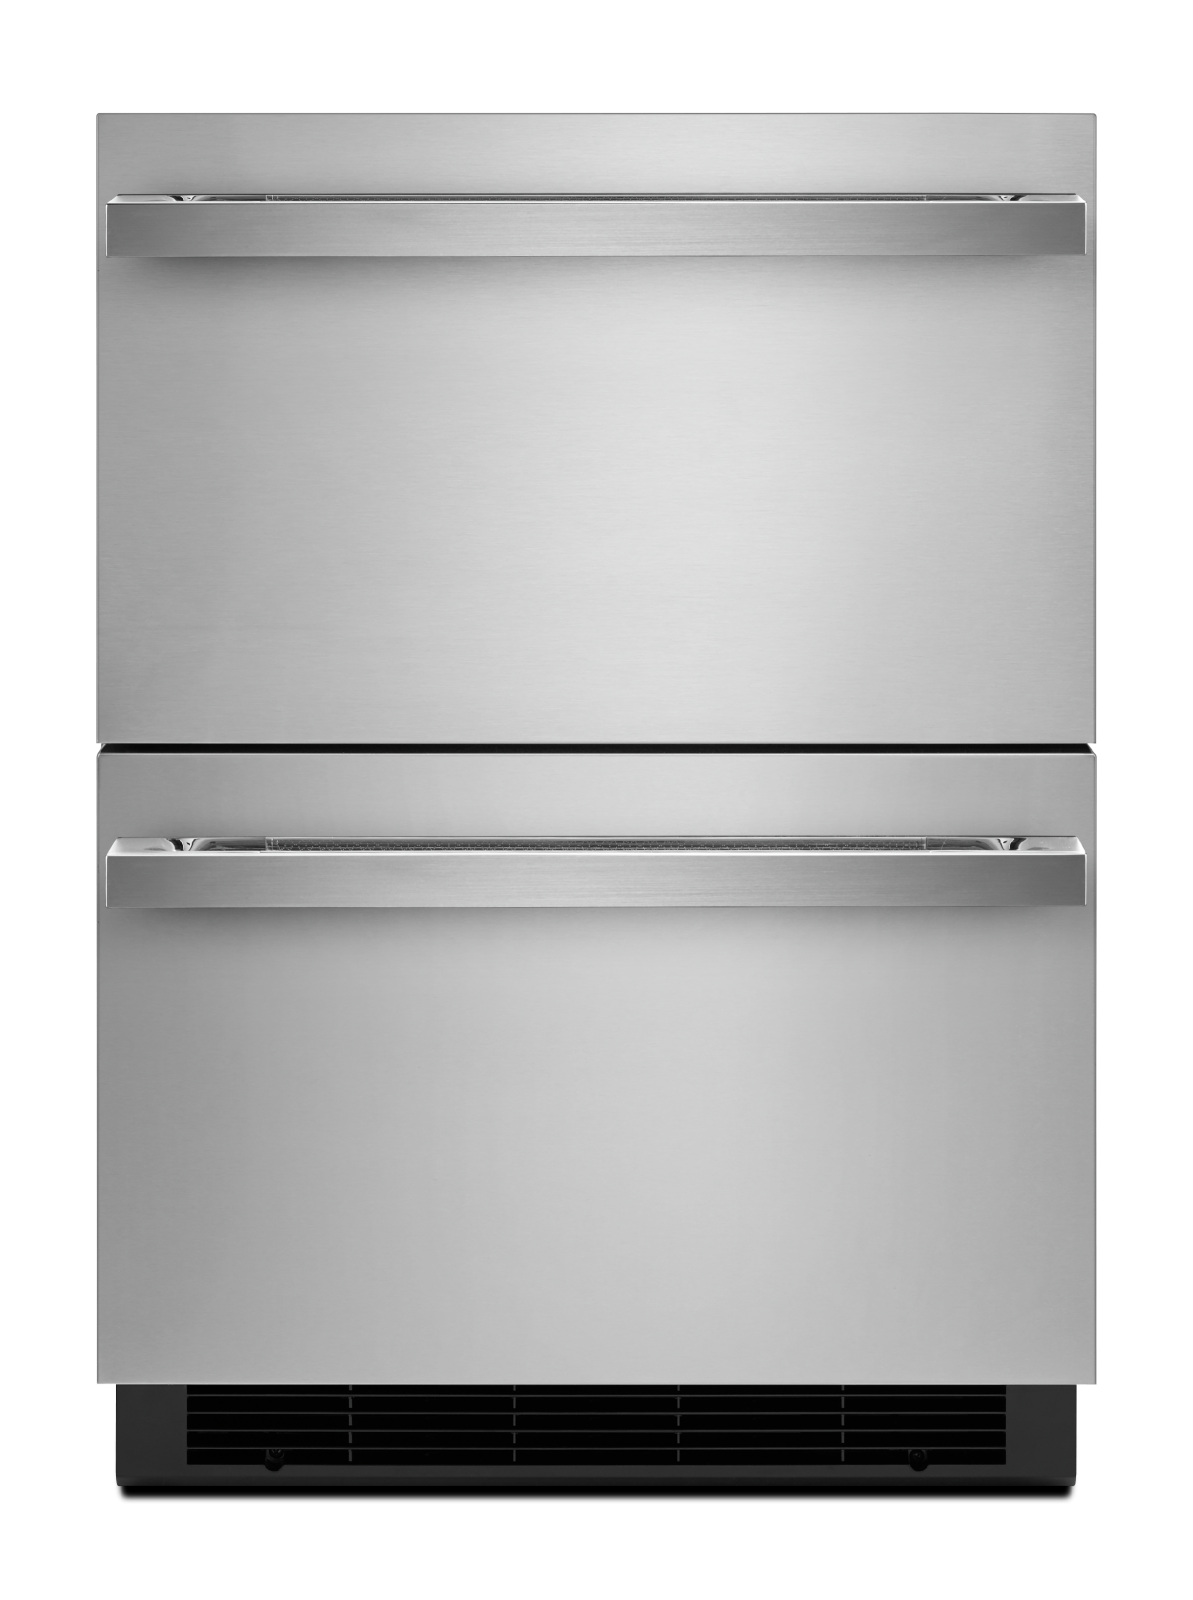 JennAir - 4.7 cu. Ft  Built In Freezer in Stainless - JUD24FRERS